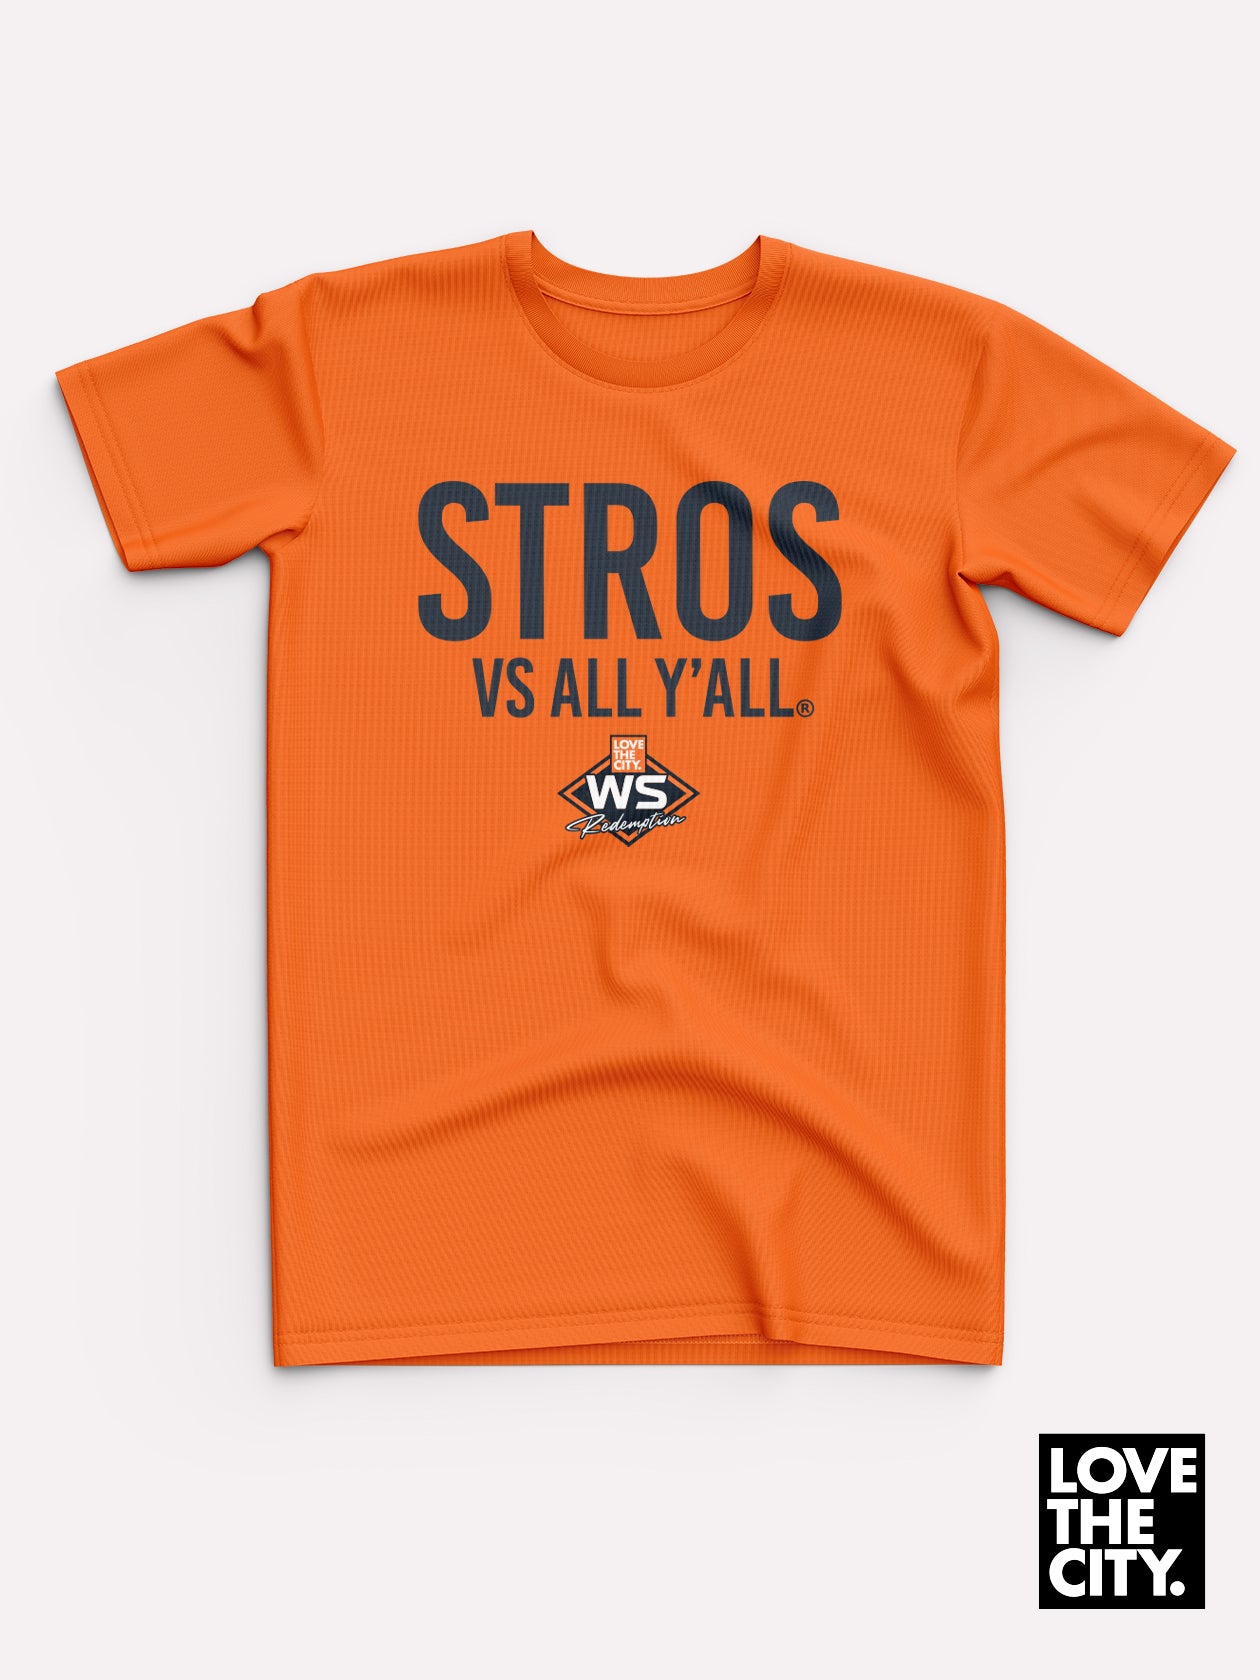 Stros Vs All Y'all Tee (2020)